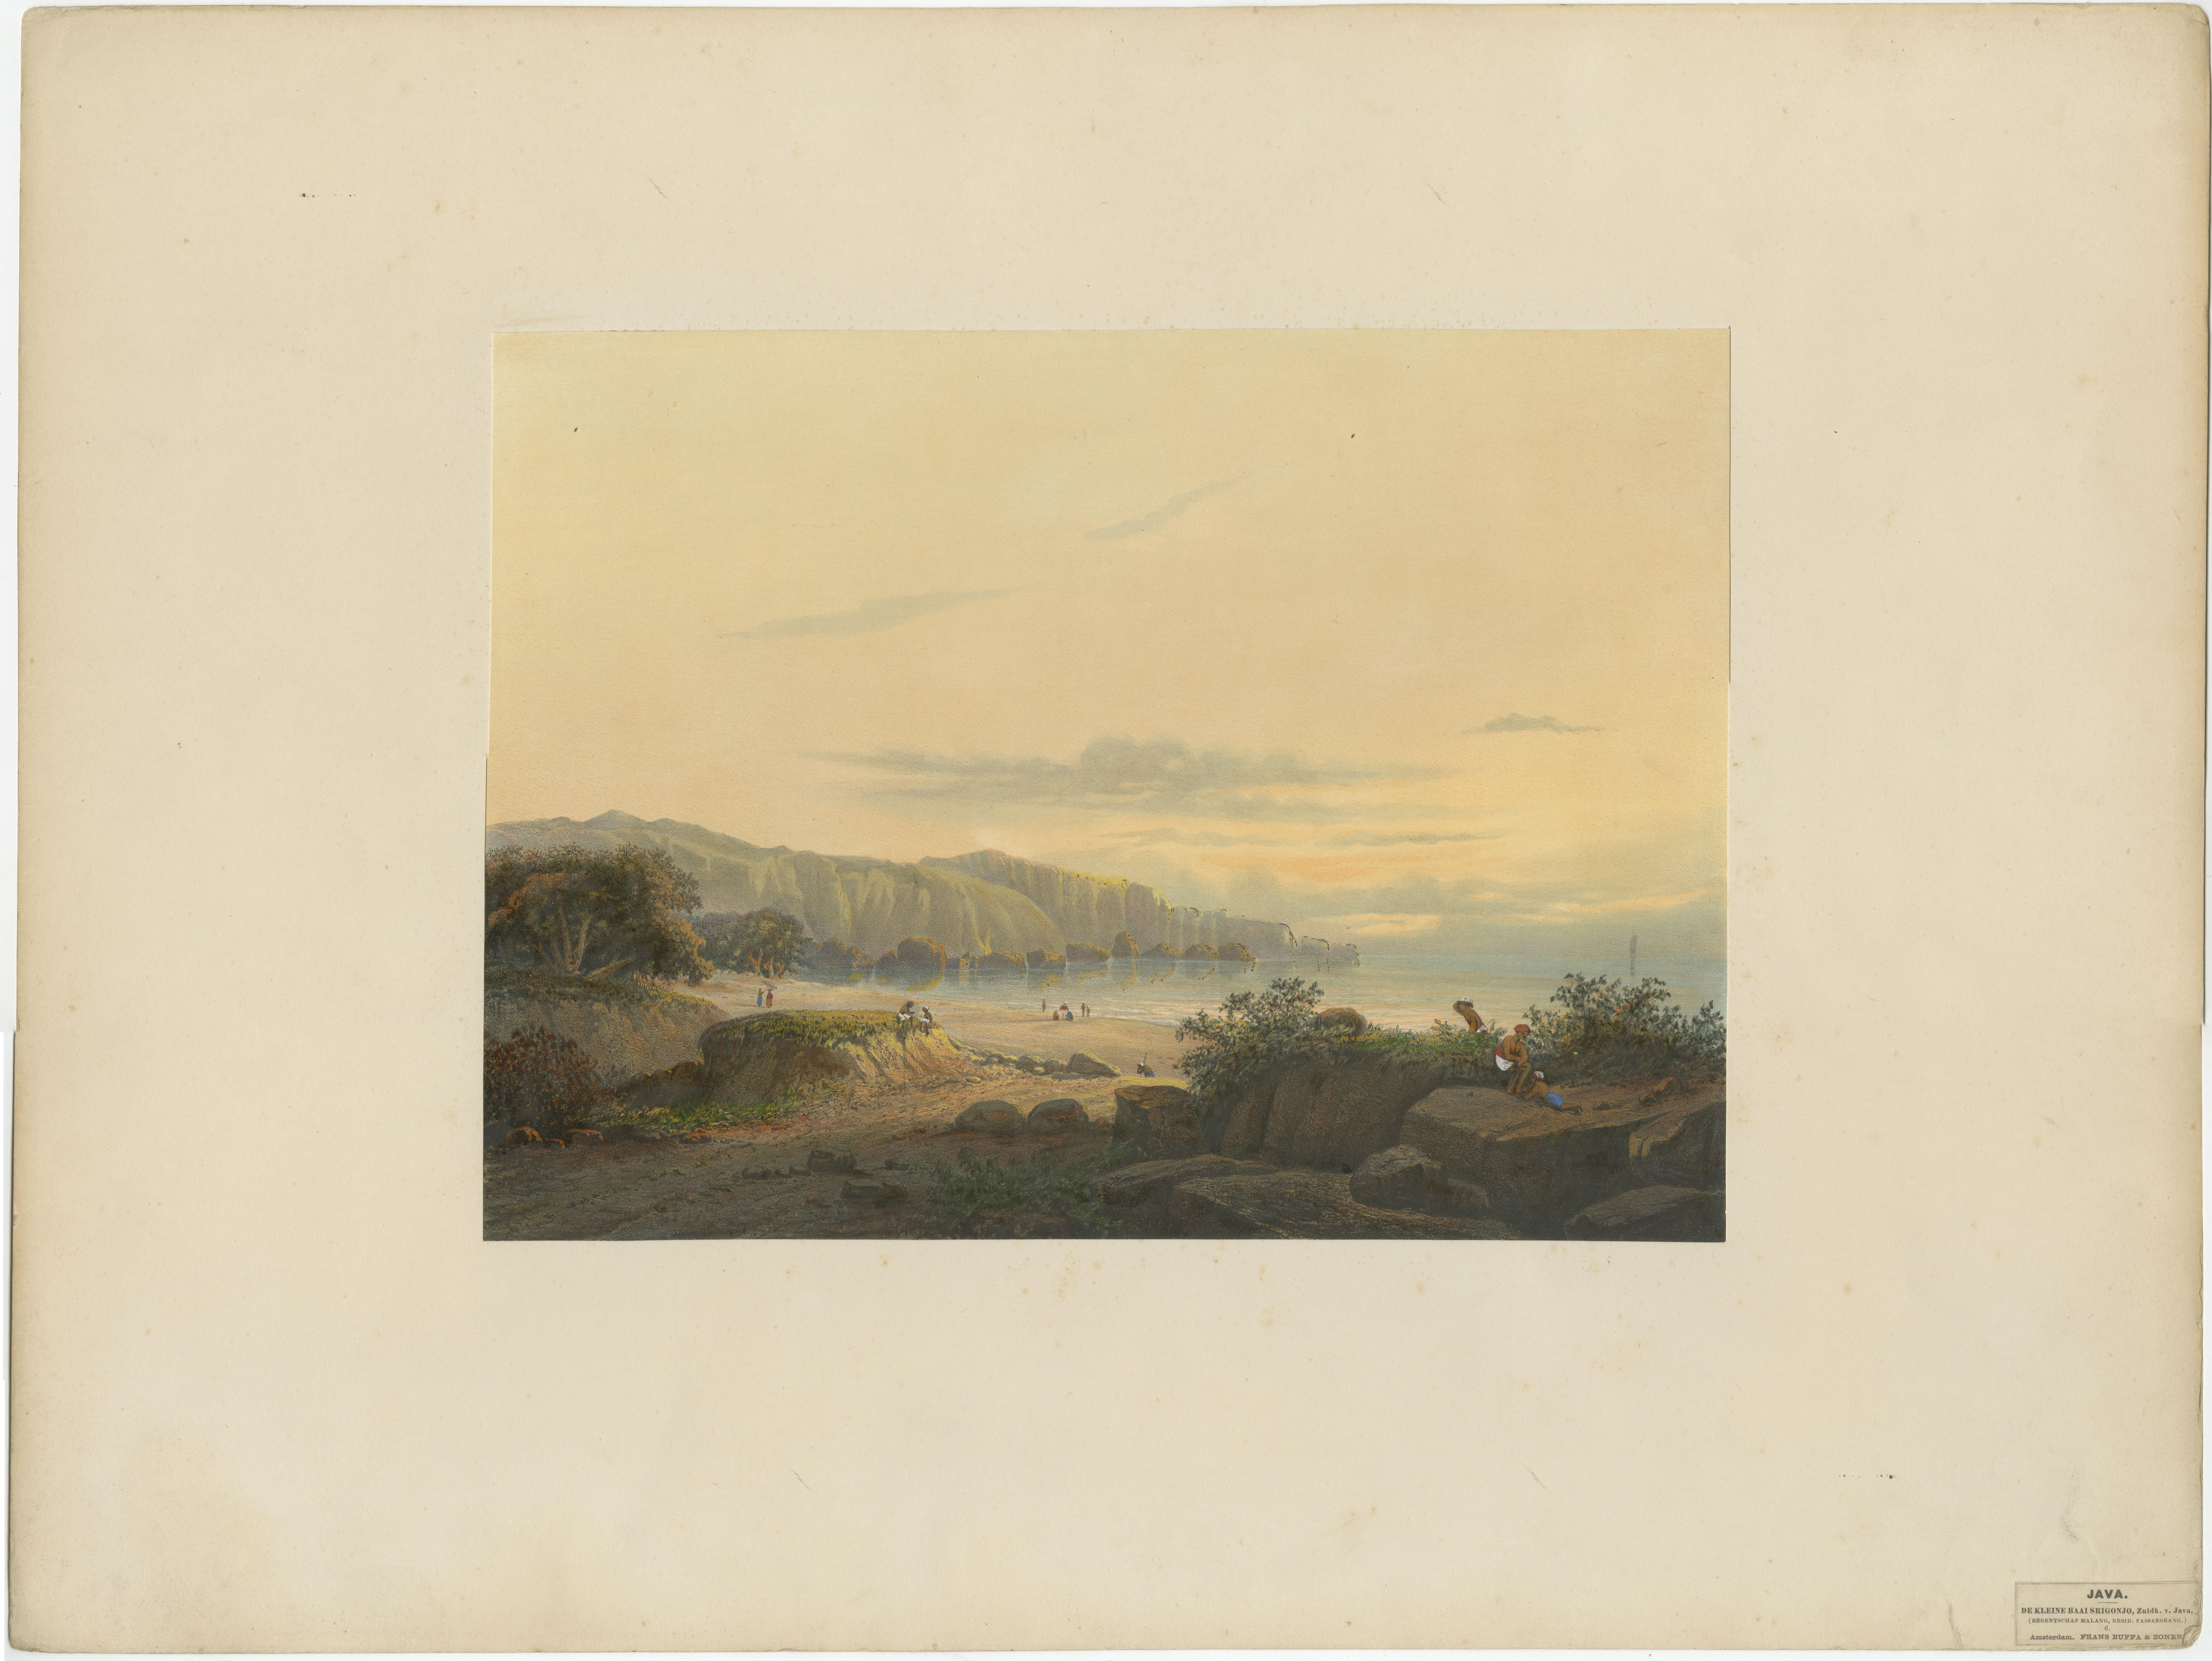 View of Srigonjo Bay on the south coast of Java (Indonesia)

Original title in Dutch: 